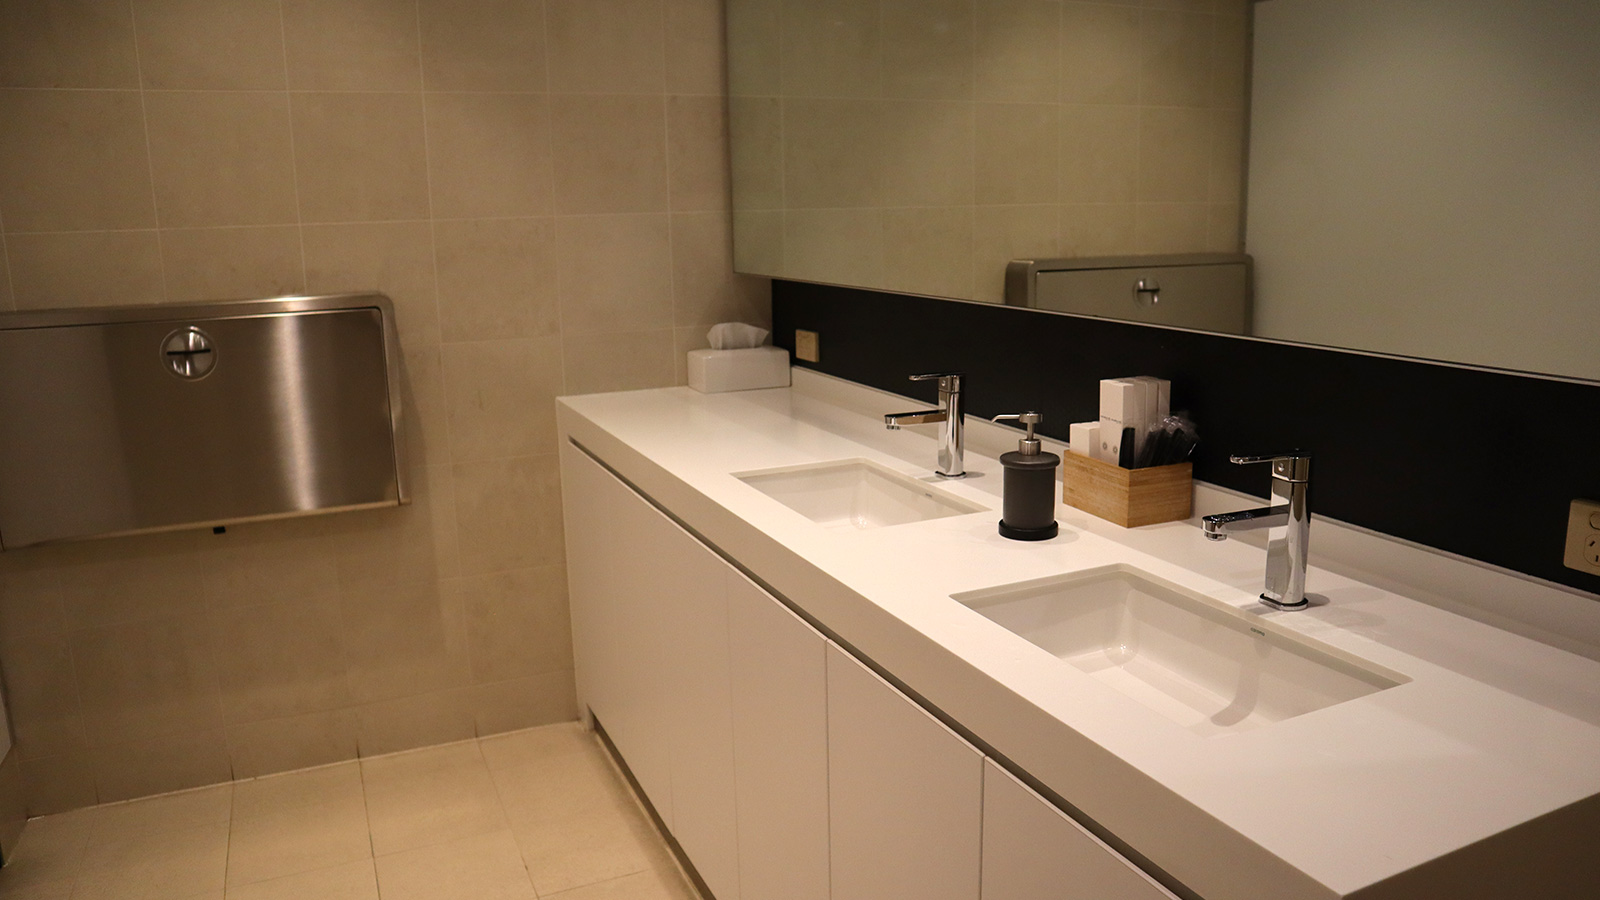 Bathroom in the First Class lounge